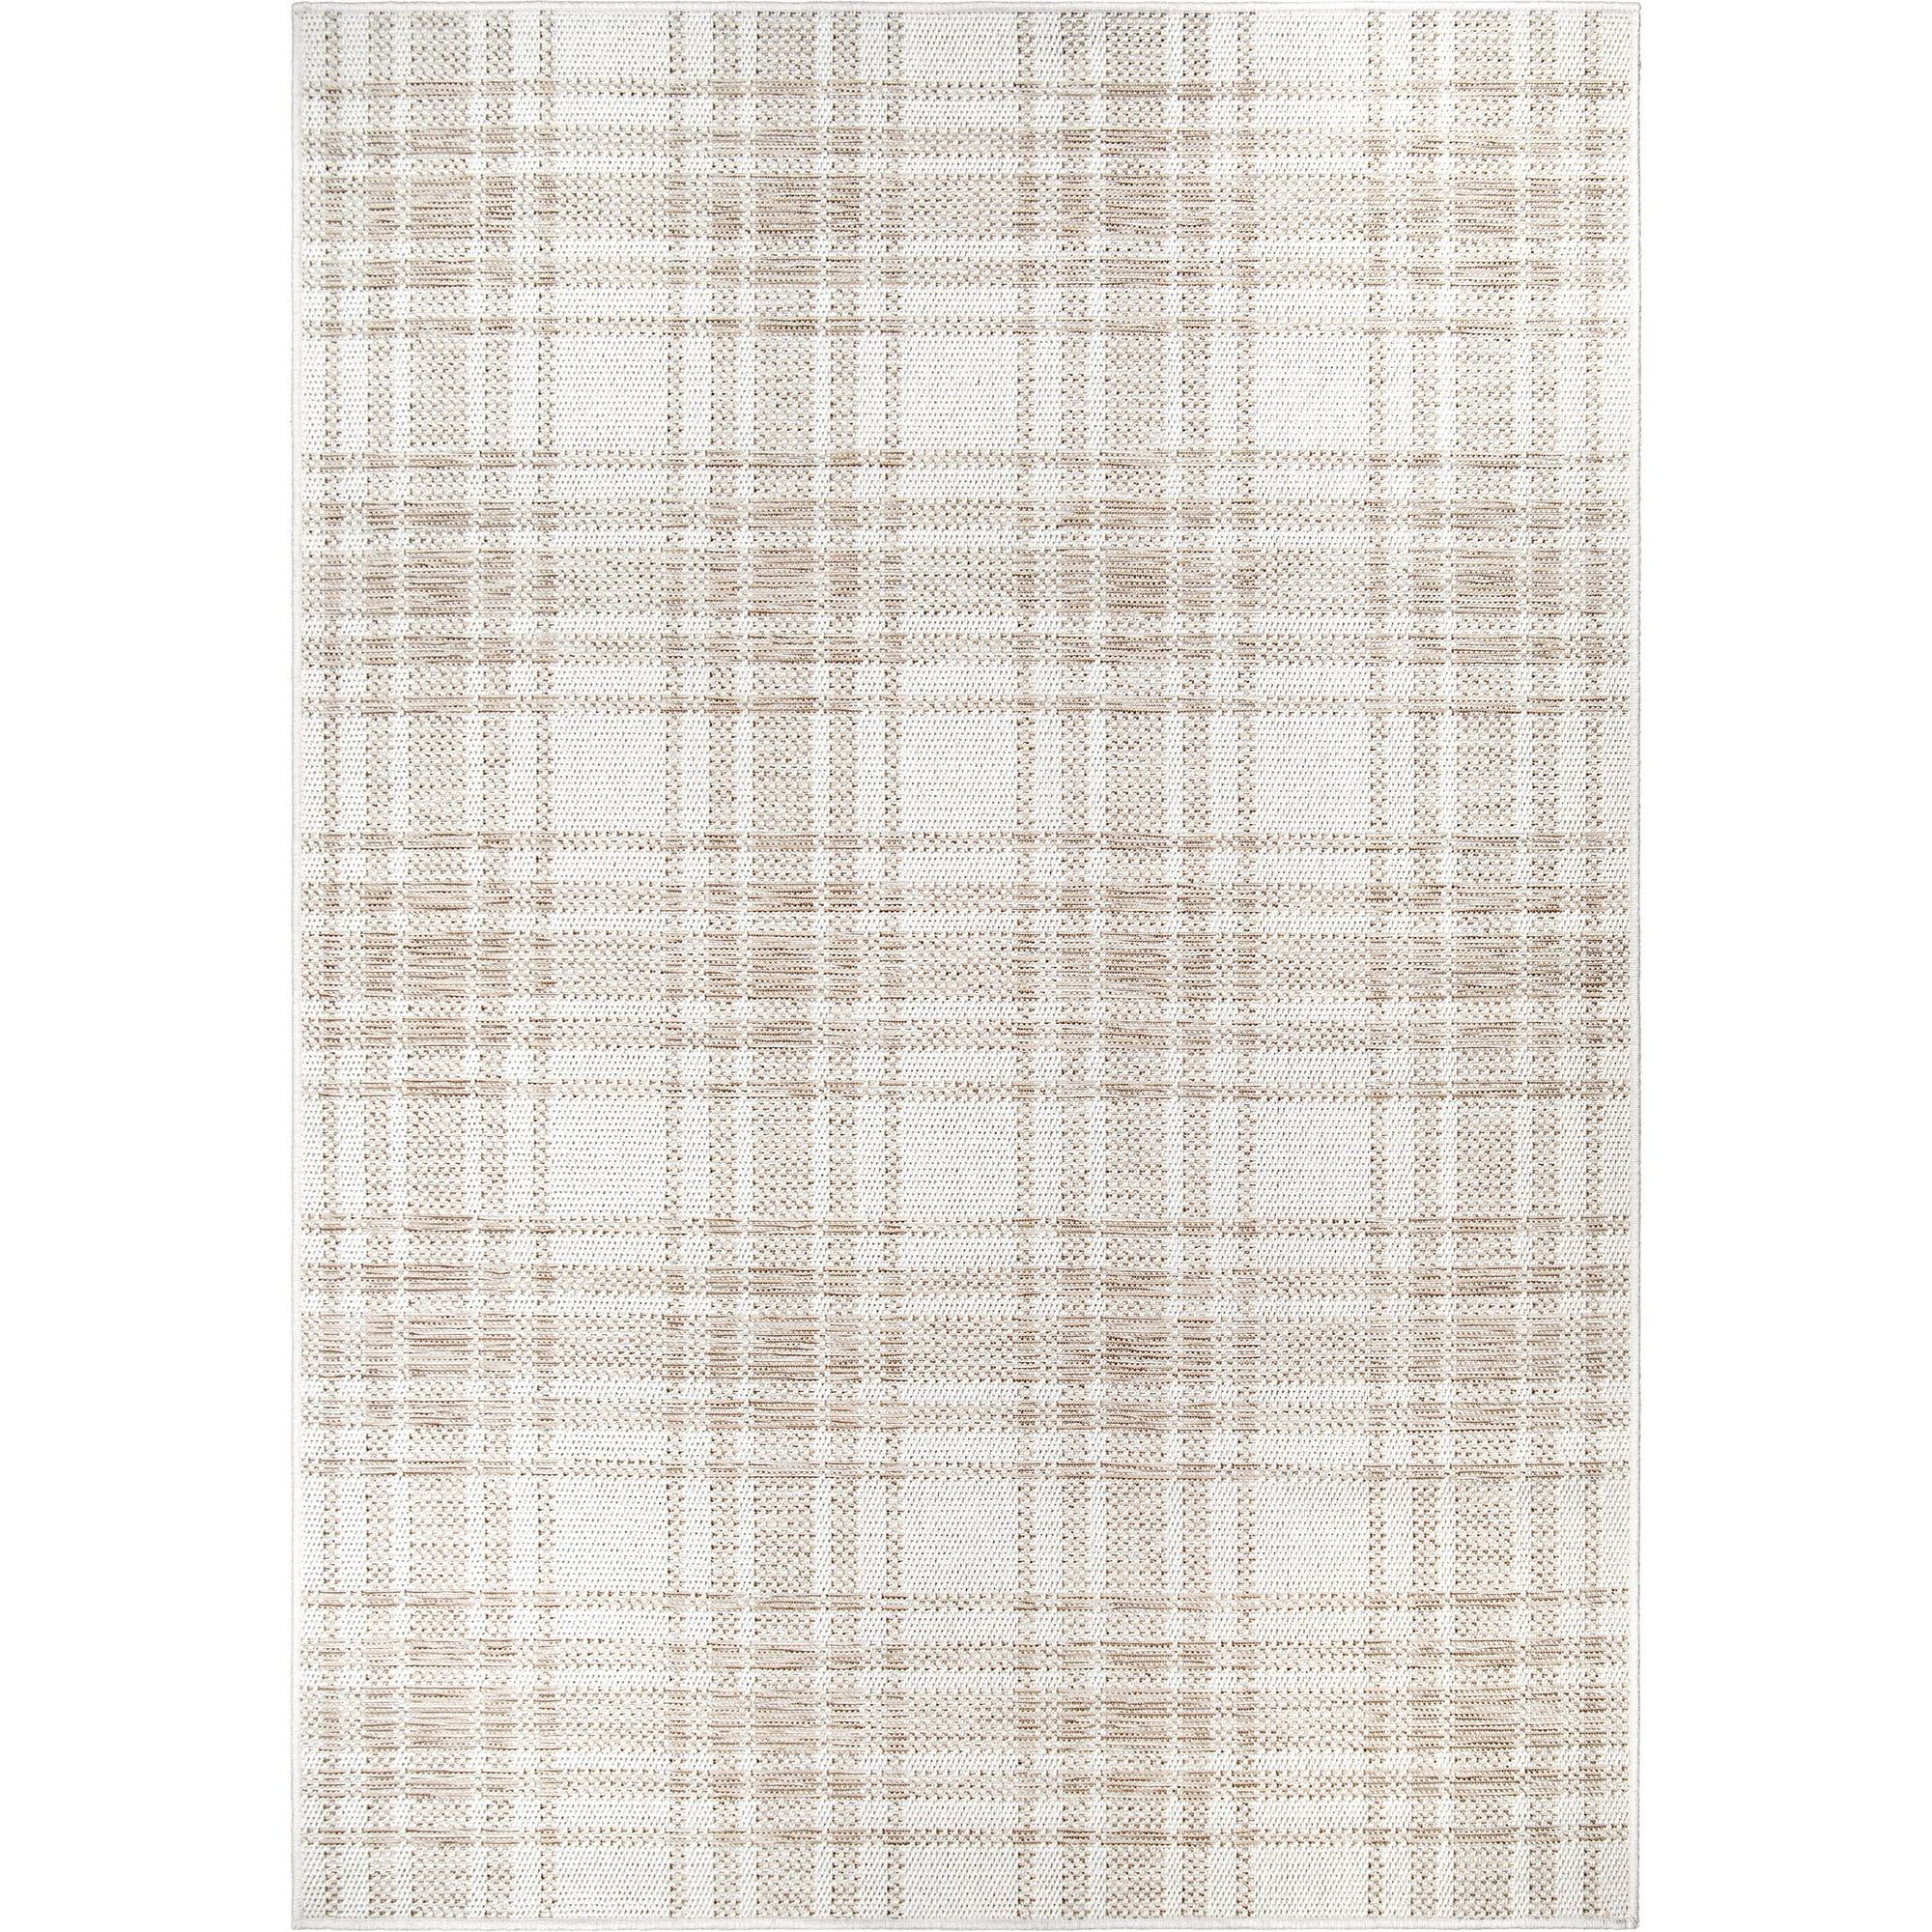 My Texas House Hampshire Plaid Reversible Indoor/ Outdoor Area Rug, Natural Driftwood, 5' x 7' | Walmart (US)